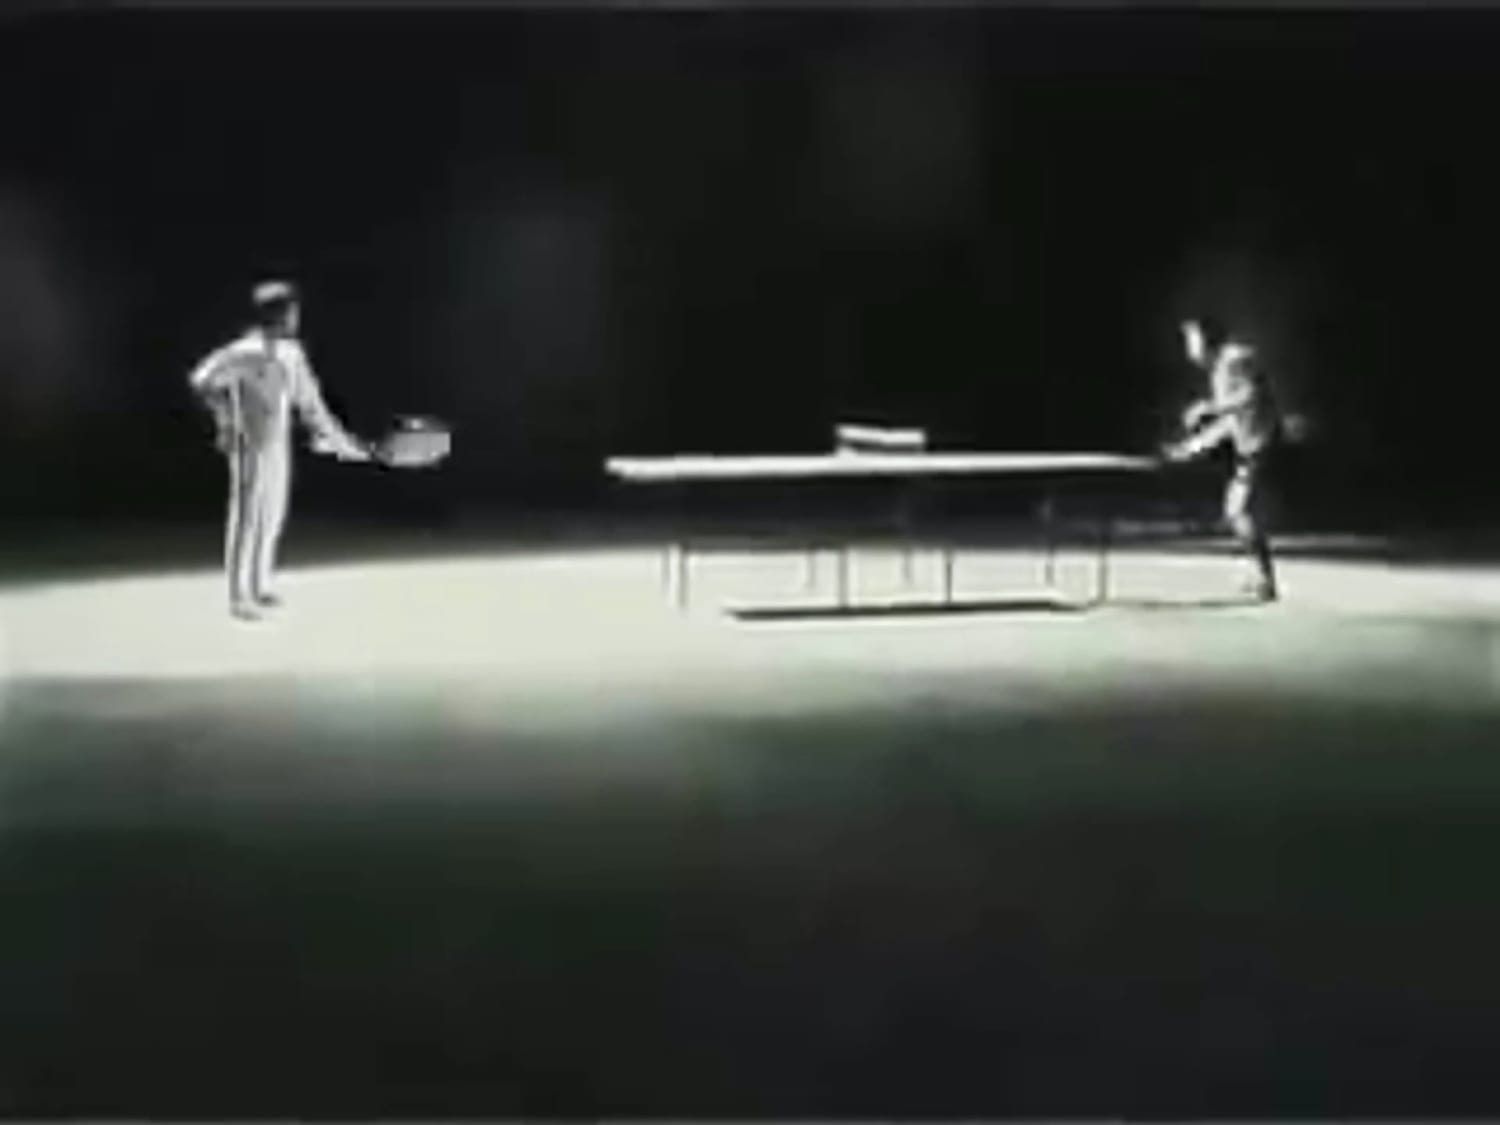 Bruce Lee playing ping-pong with nunchucks.